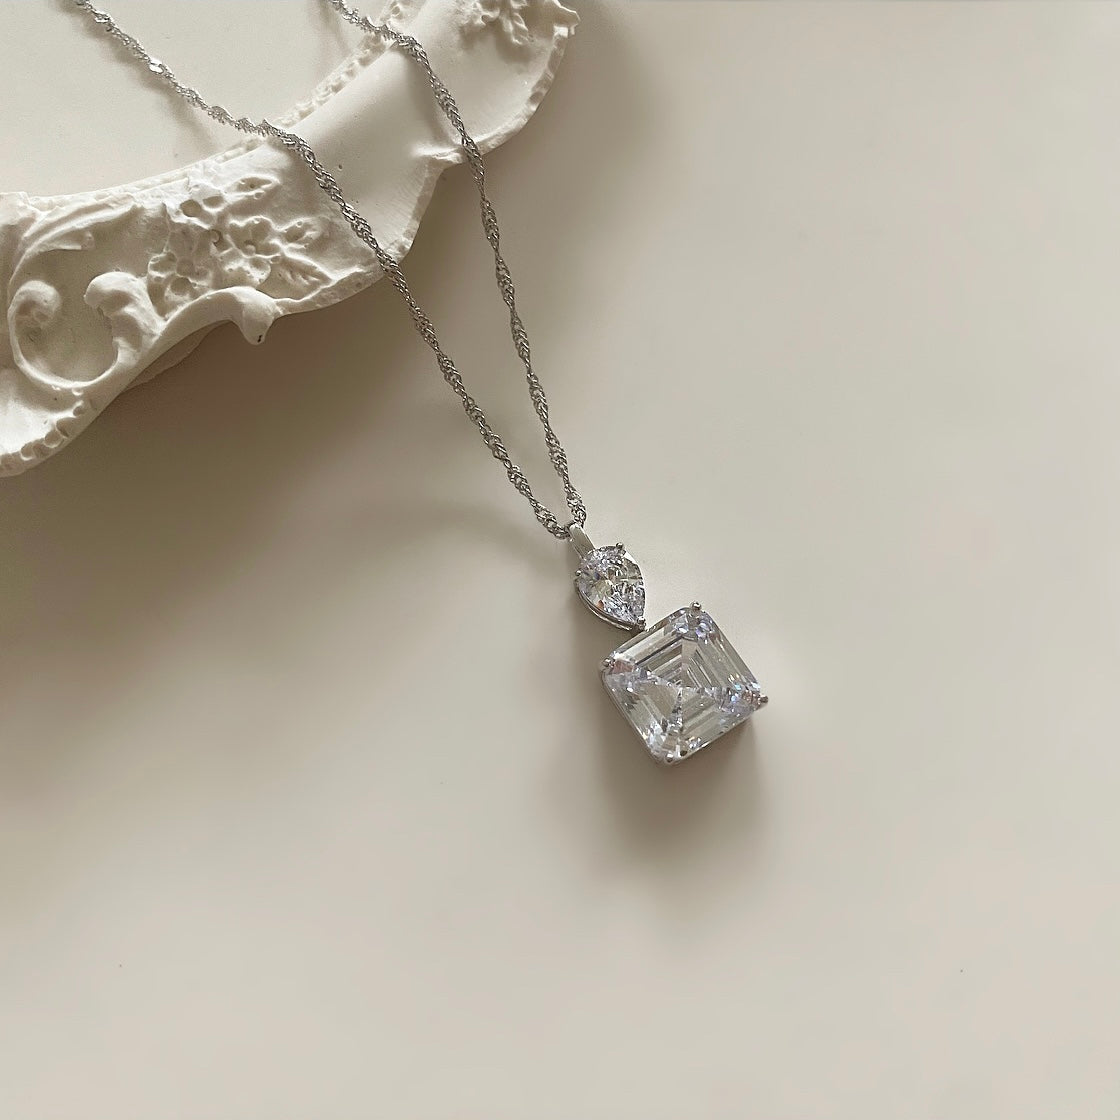 This beautiful Sterling Silver necklace features stunning crystal zirconia that will sparkle and shine all day. Expertly cut and polished to a high luster, the zirconia makes a bold statement without sacrificing comfort and elegance. Perfect for any occasion. Pair with crystal earrings for a complete look.  Necklace drop 23cm